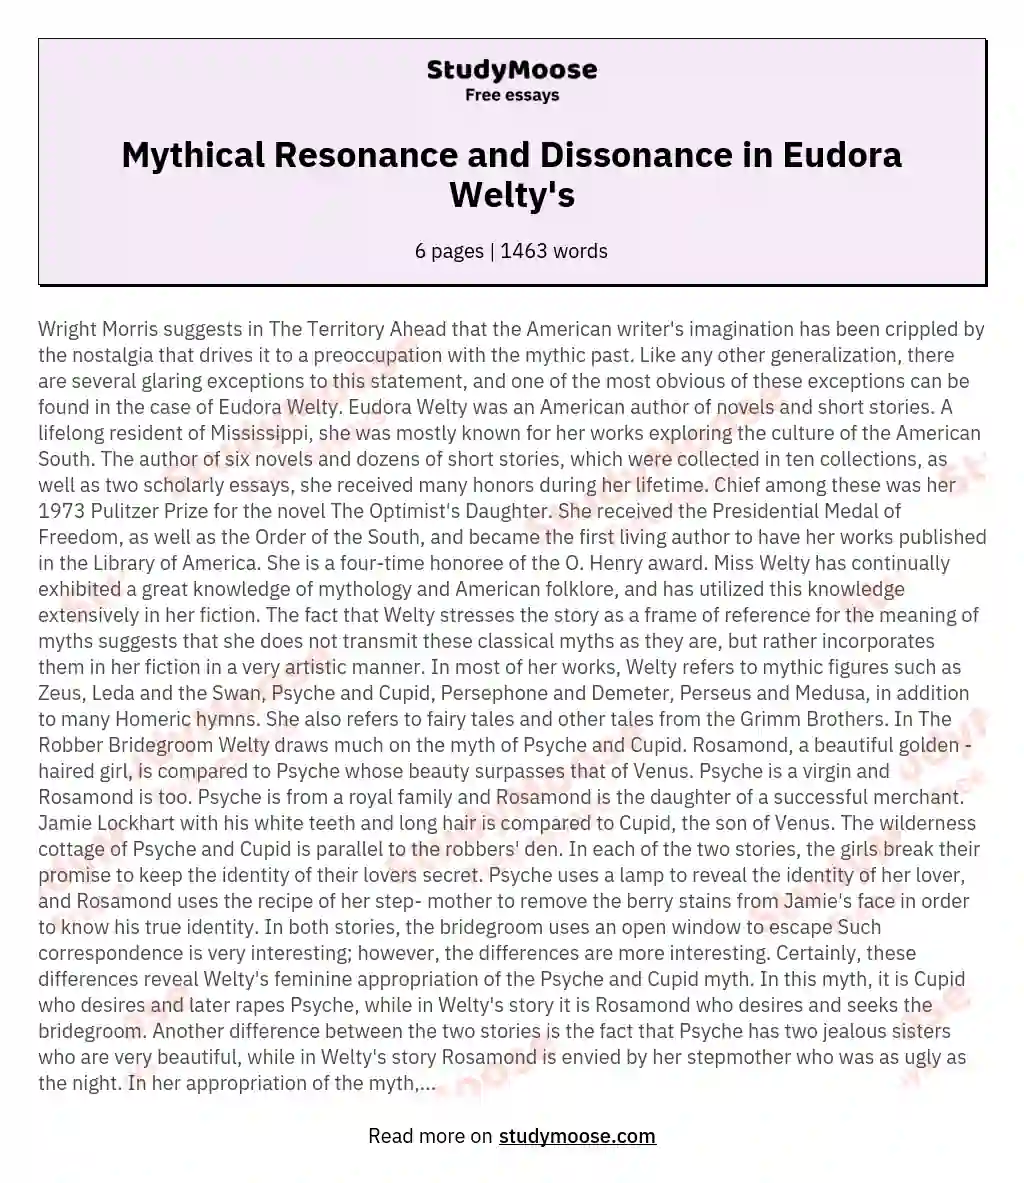 Mythical Resonance and Dissonance in Eudora Welty's essay